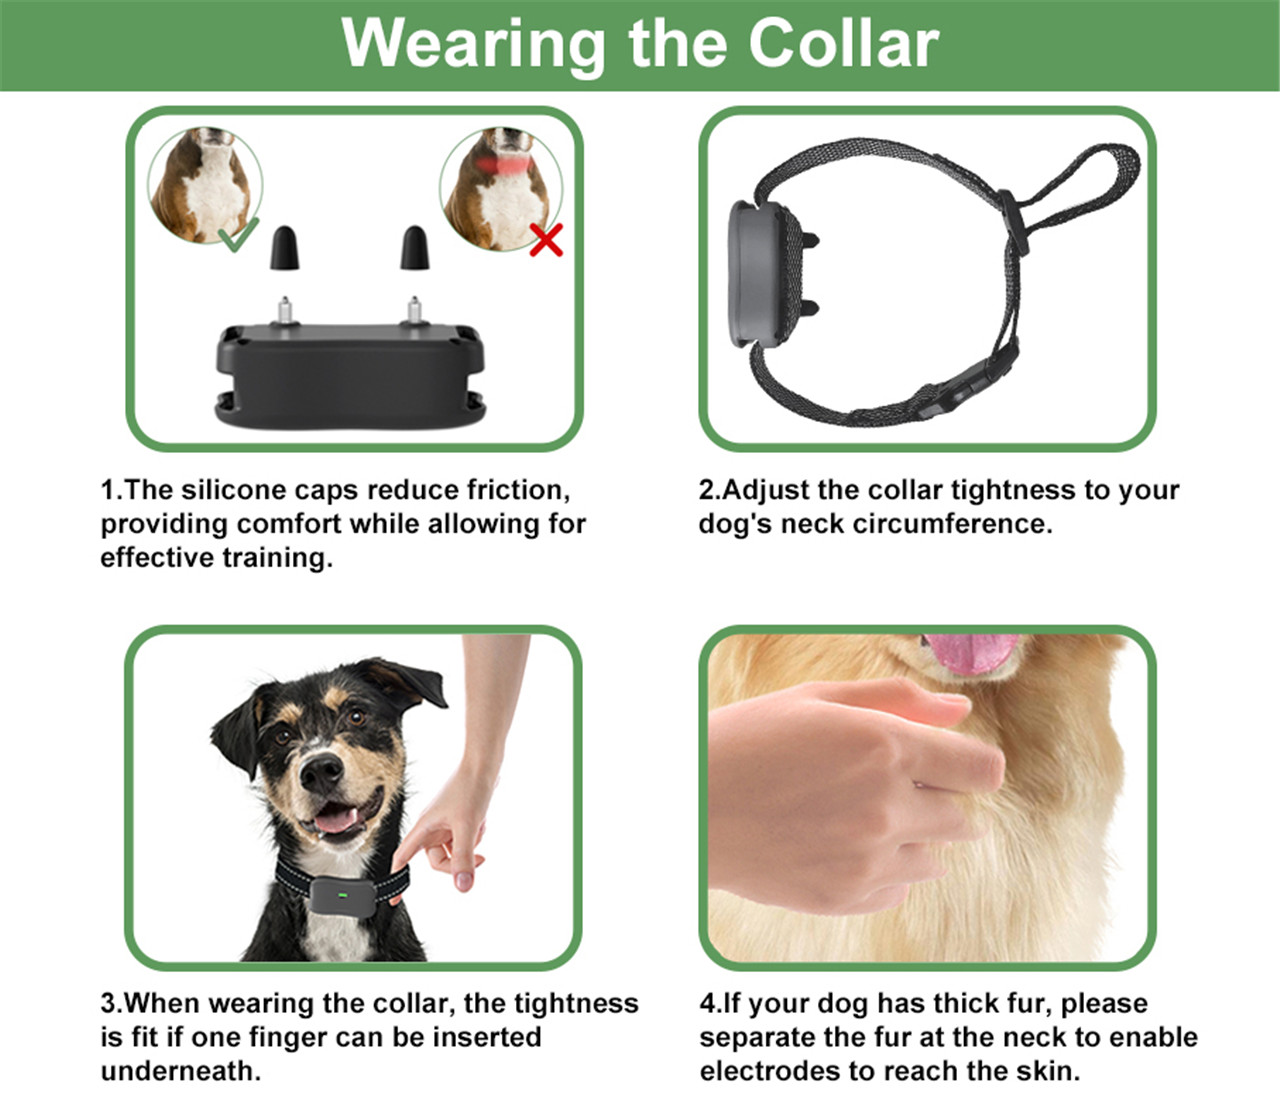 Dog Training Collar with Remote, 34 Mile Range Dog Shock Collar, Waterproof and Rechargeable with Beep, Vibration, Safe Shock, Light and Keypad Lock Mode for Large Medium Small Dogs-03 (1)